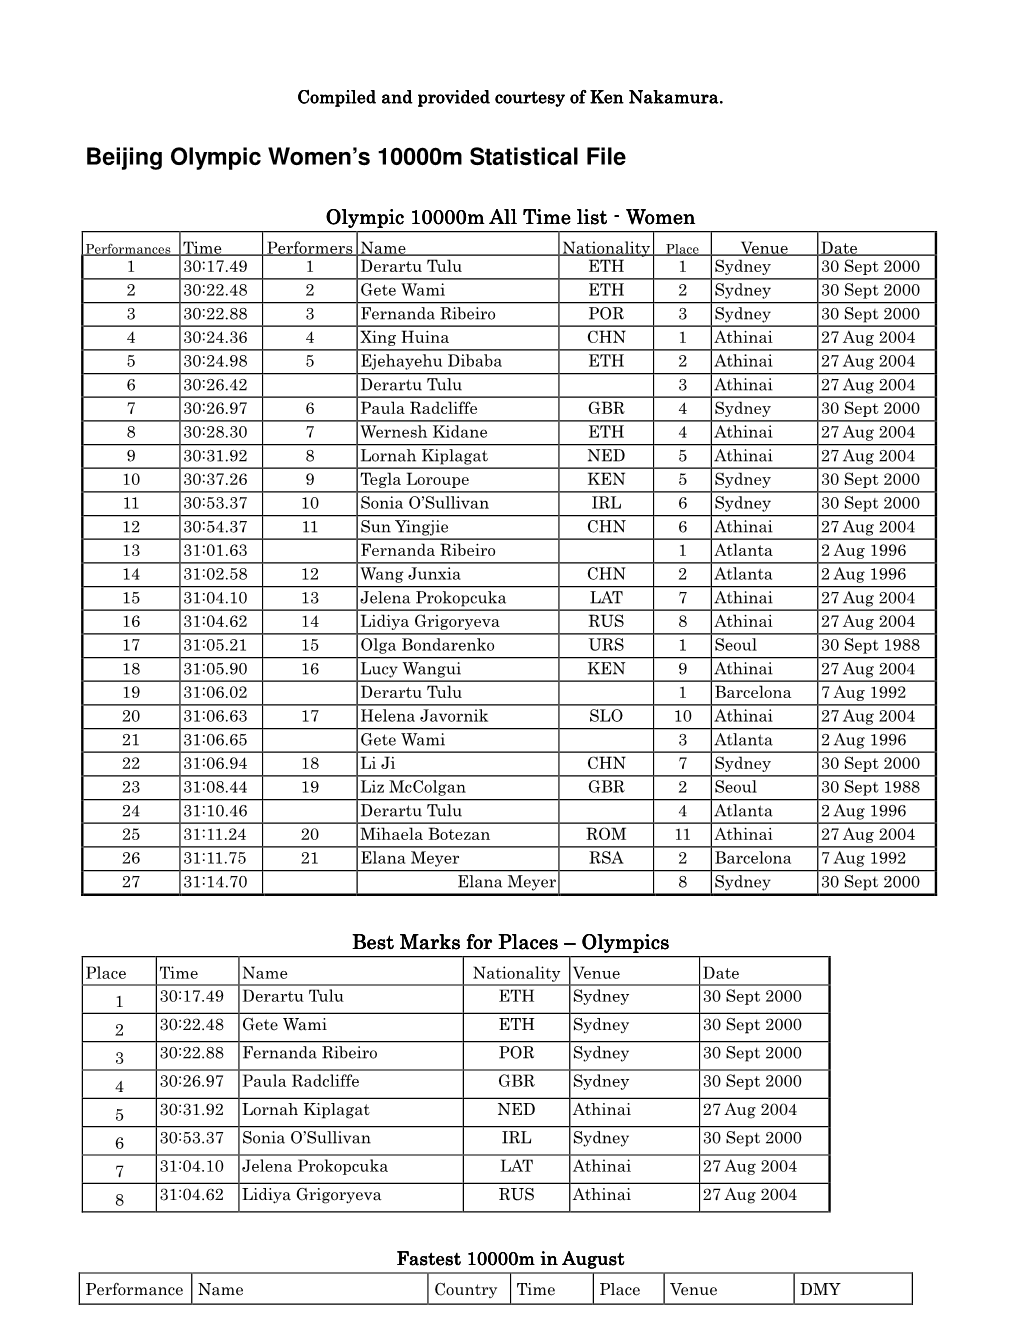 Beijing Olympic Women's 10000M Statistical File